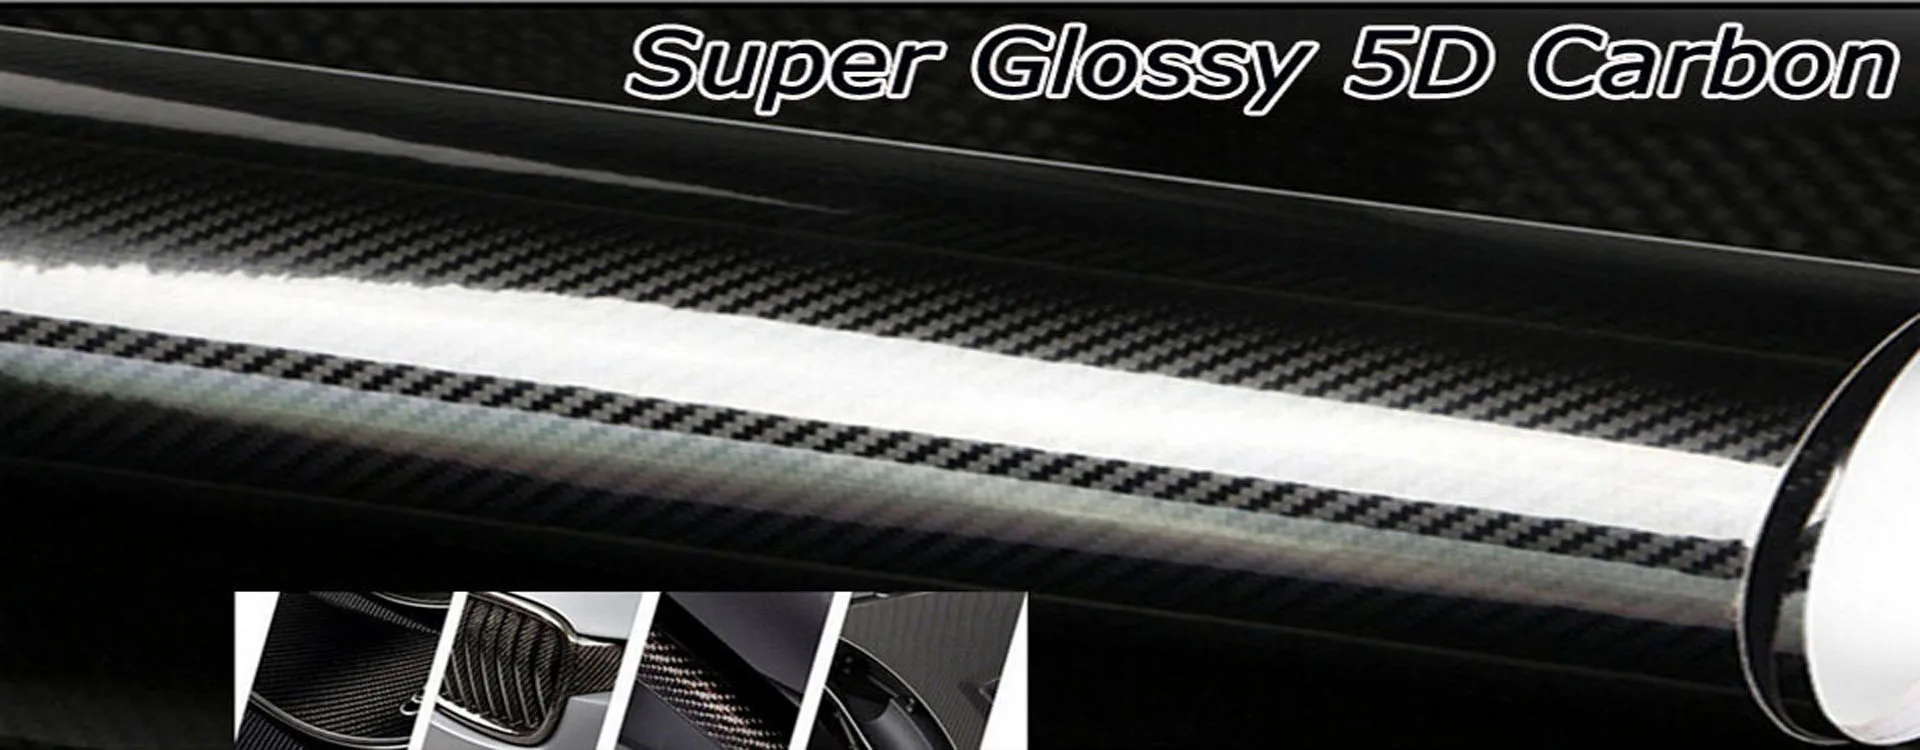 Flexible Silver Chrome Mirror Vinyl Film For Car Body decoration Glossy  Chrome mirror Vinyl Film with air free bubbles